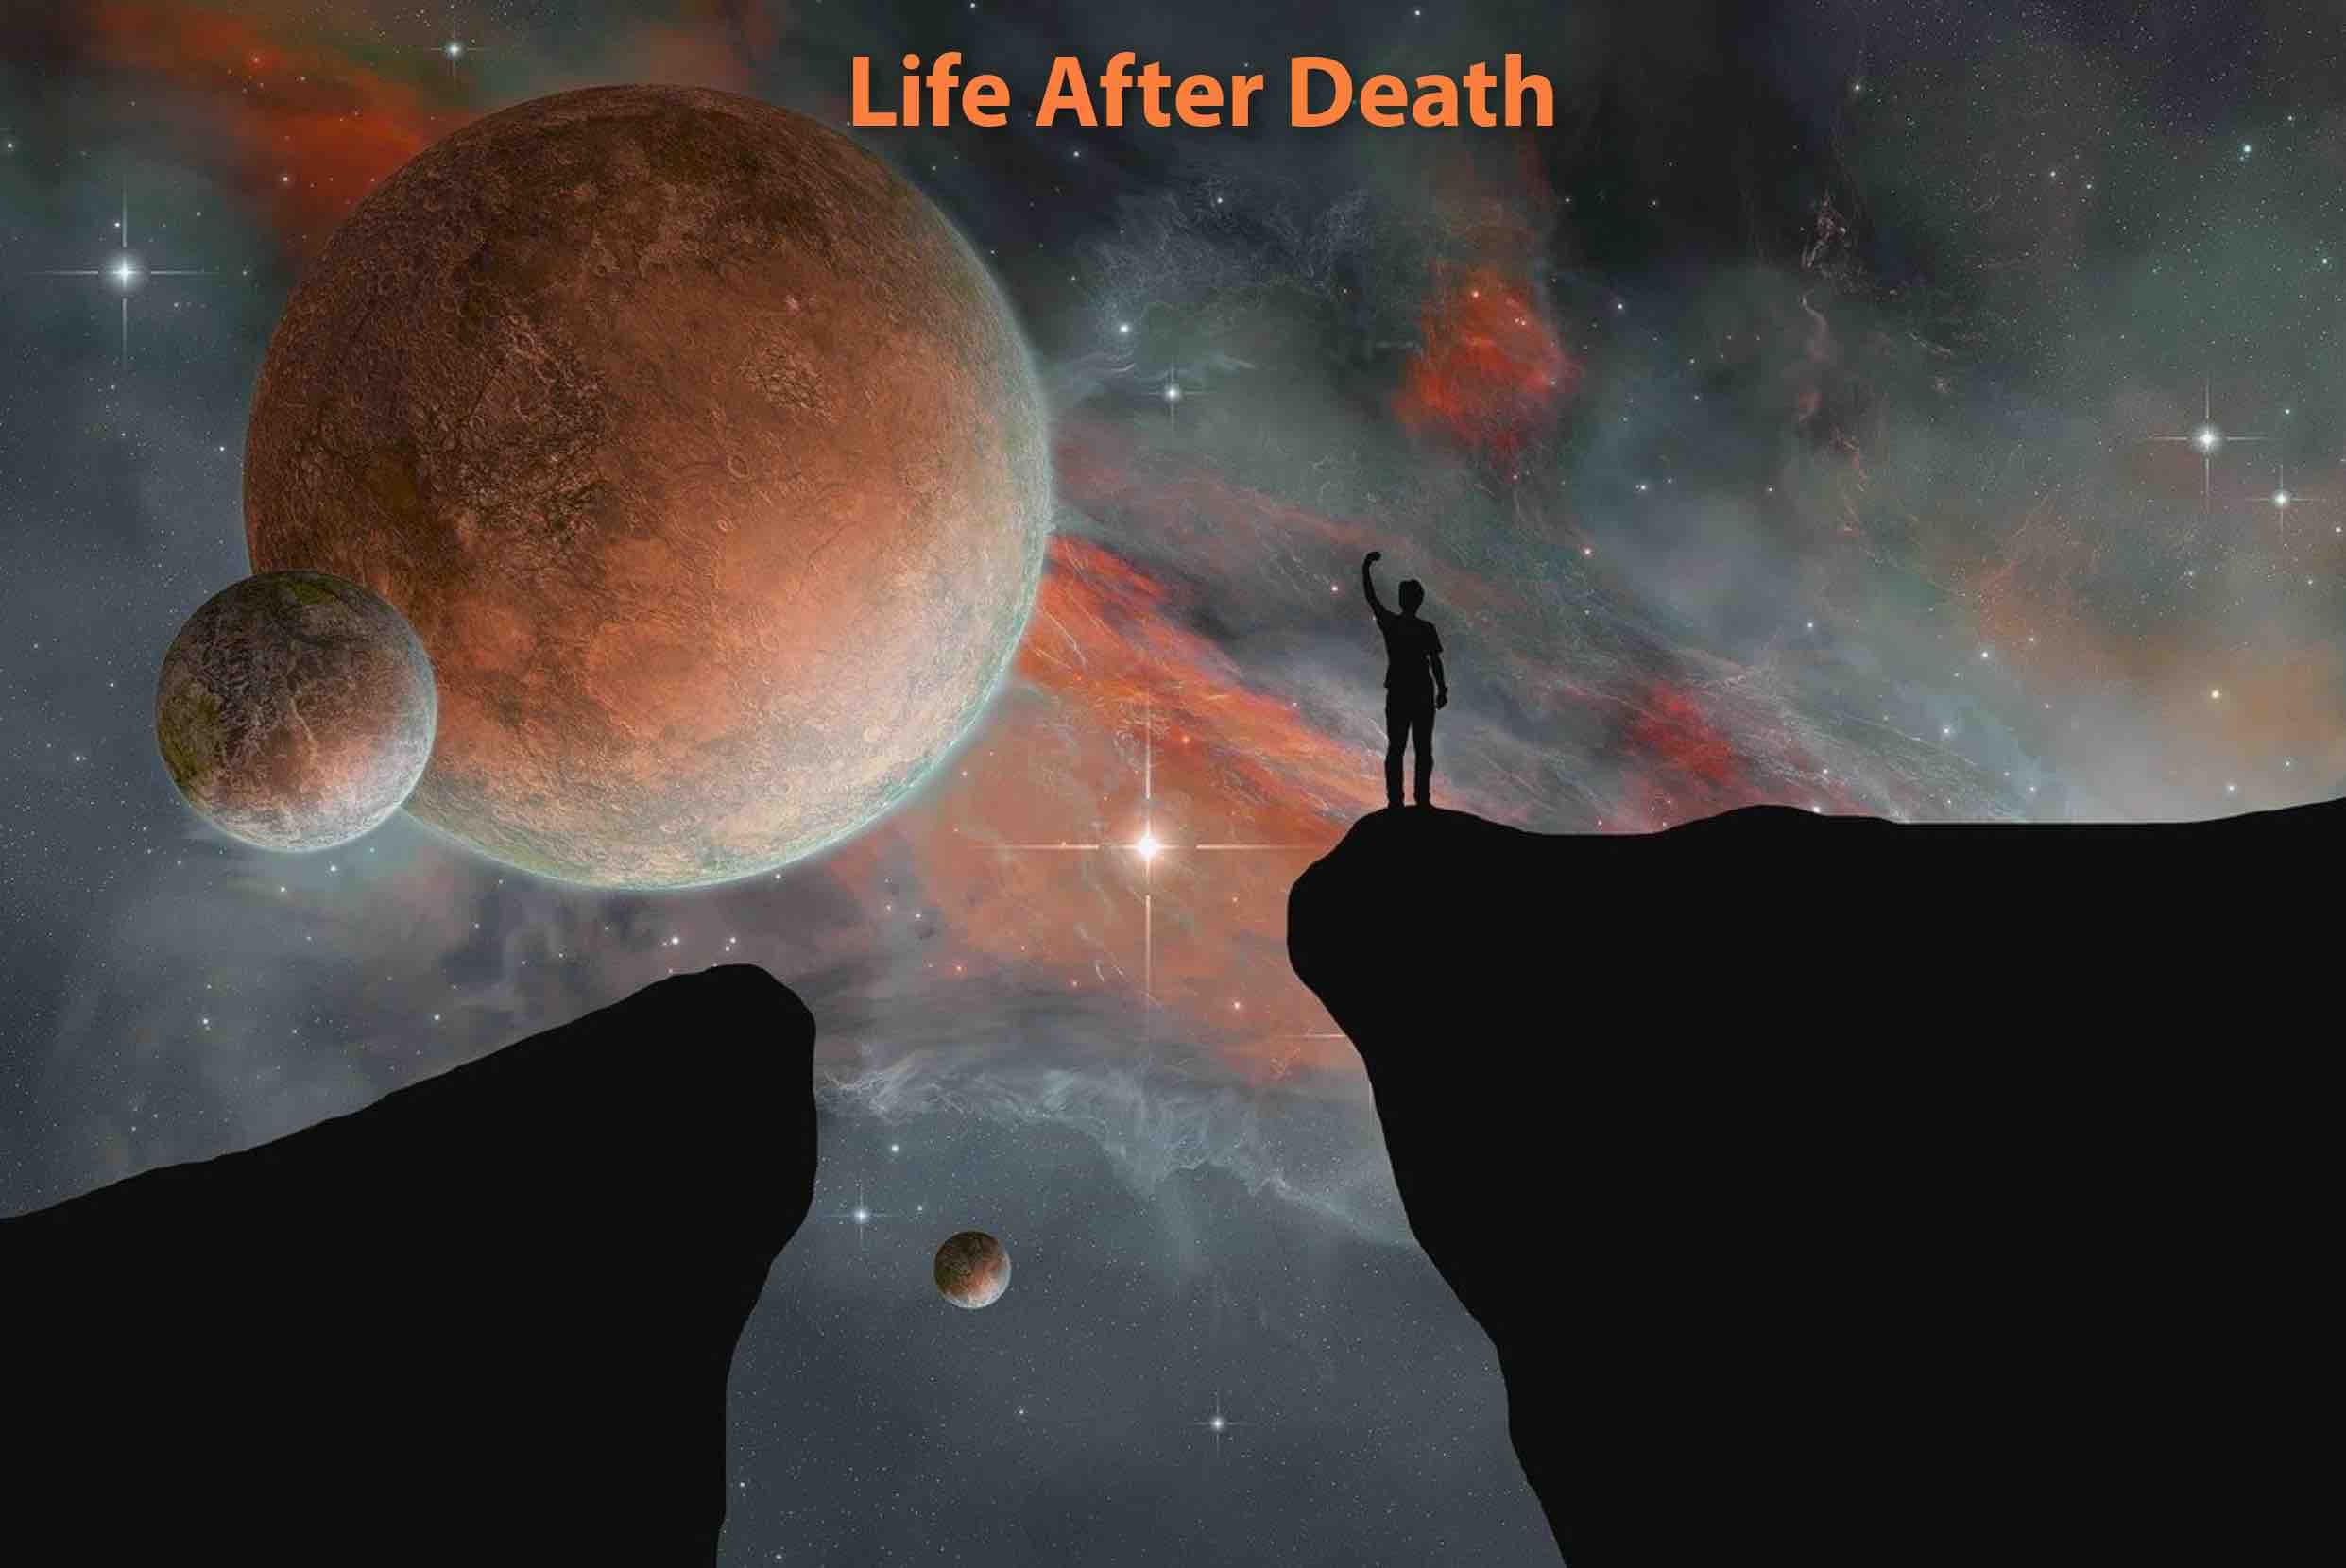 Life after death - Everything you need to know